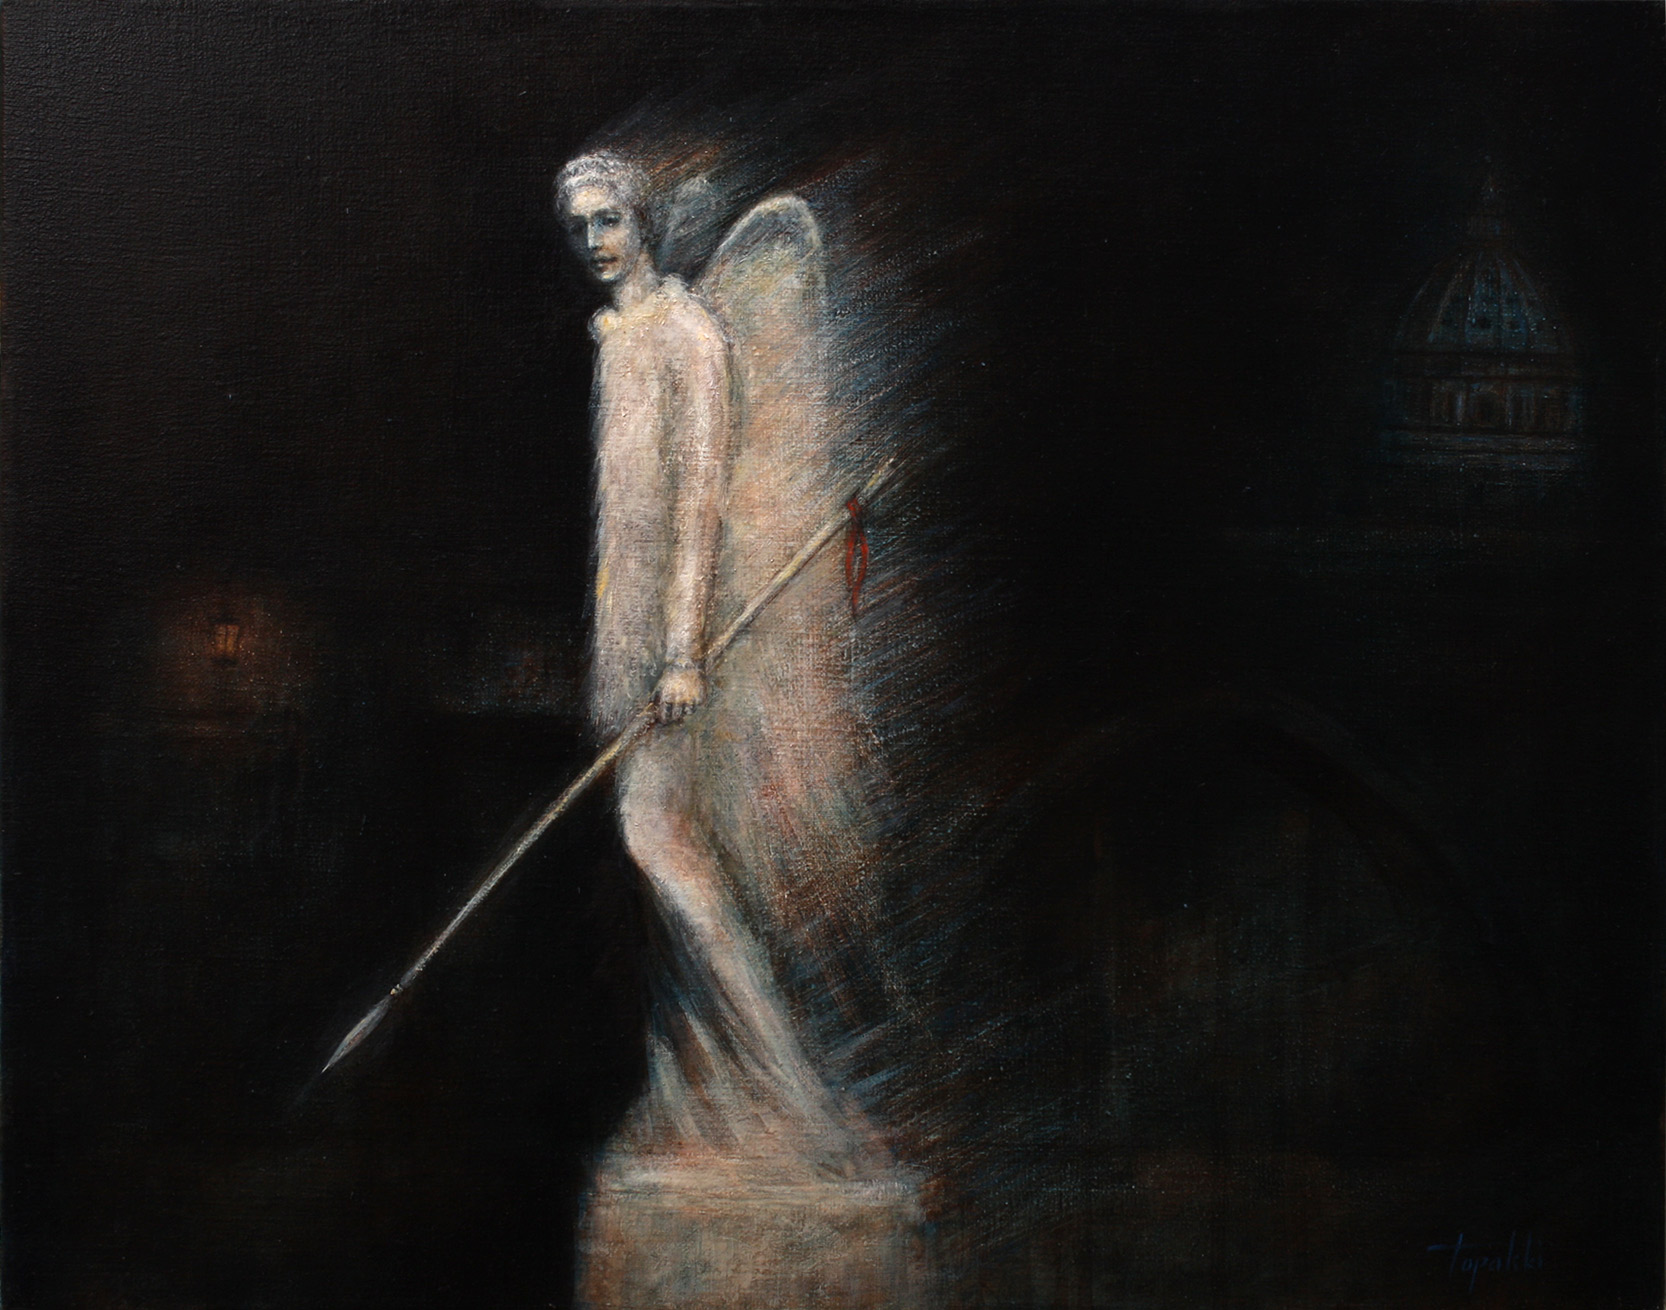 The Lost Angel – Oil Painting | Fine Arts Gallery - Original fine ...